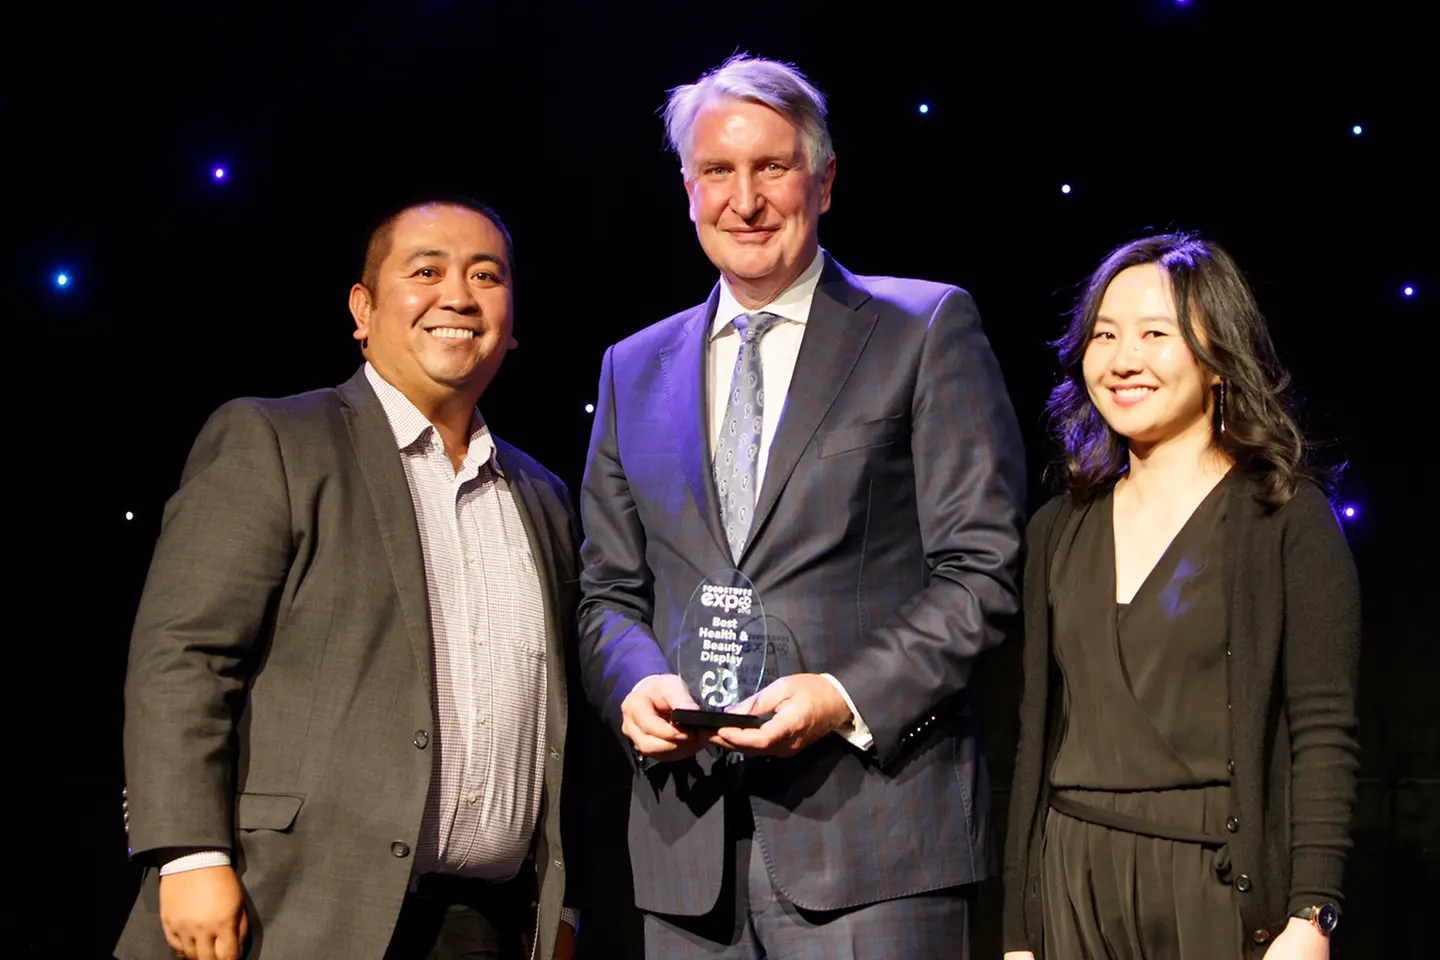 Henkel New Zealand’s Beauty Care team receive the award from Steve Anderson, the Chief Executive Officer of Foodstuffs South Island Ltd.